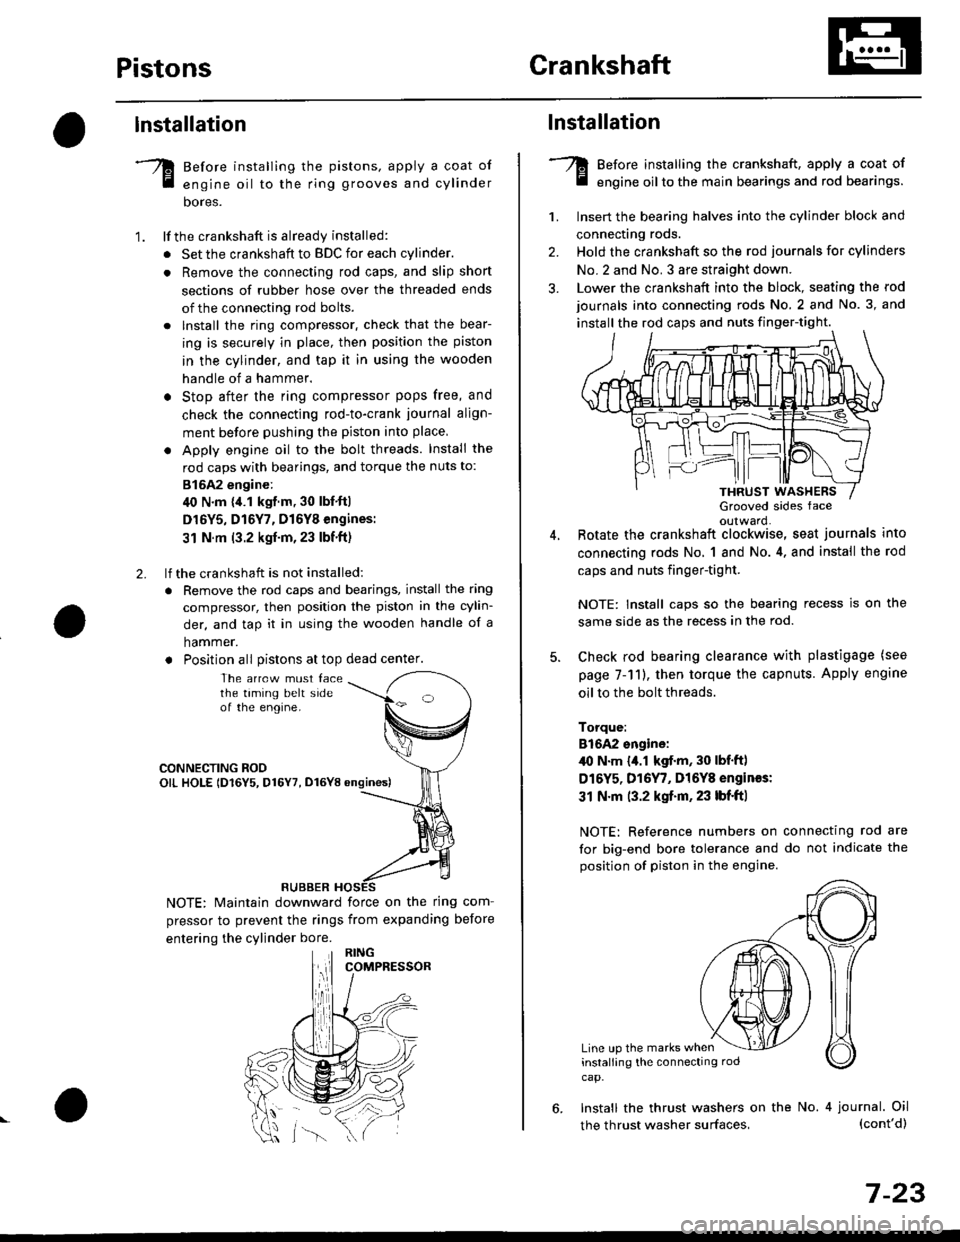 HONDA CIVIC 1997 6.G Service Manual PistonsGrankshaft
lnstallation
Before installing the pistons, apply a coat of
engine oil to the ring grooves and cylinder
bores.
lf the crankshaft is already installed:
. Set the crankshaft to BDC for